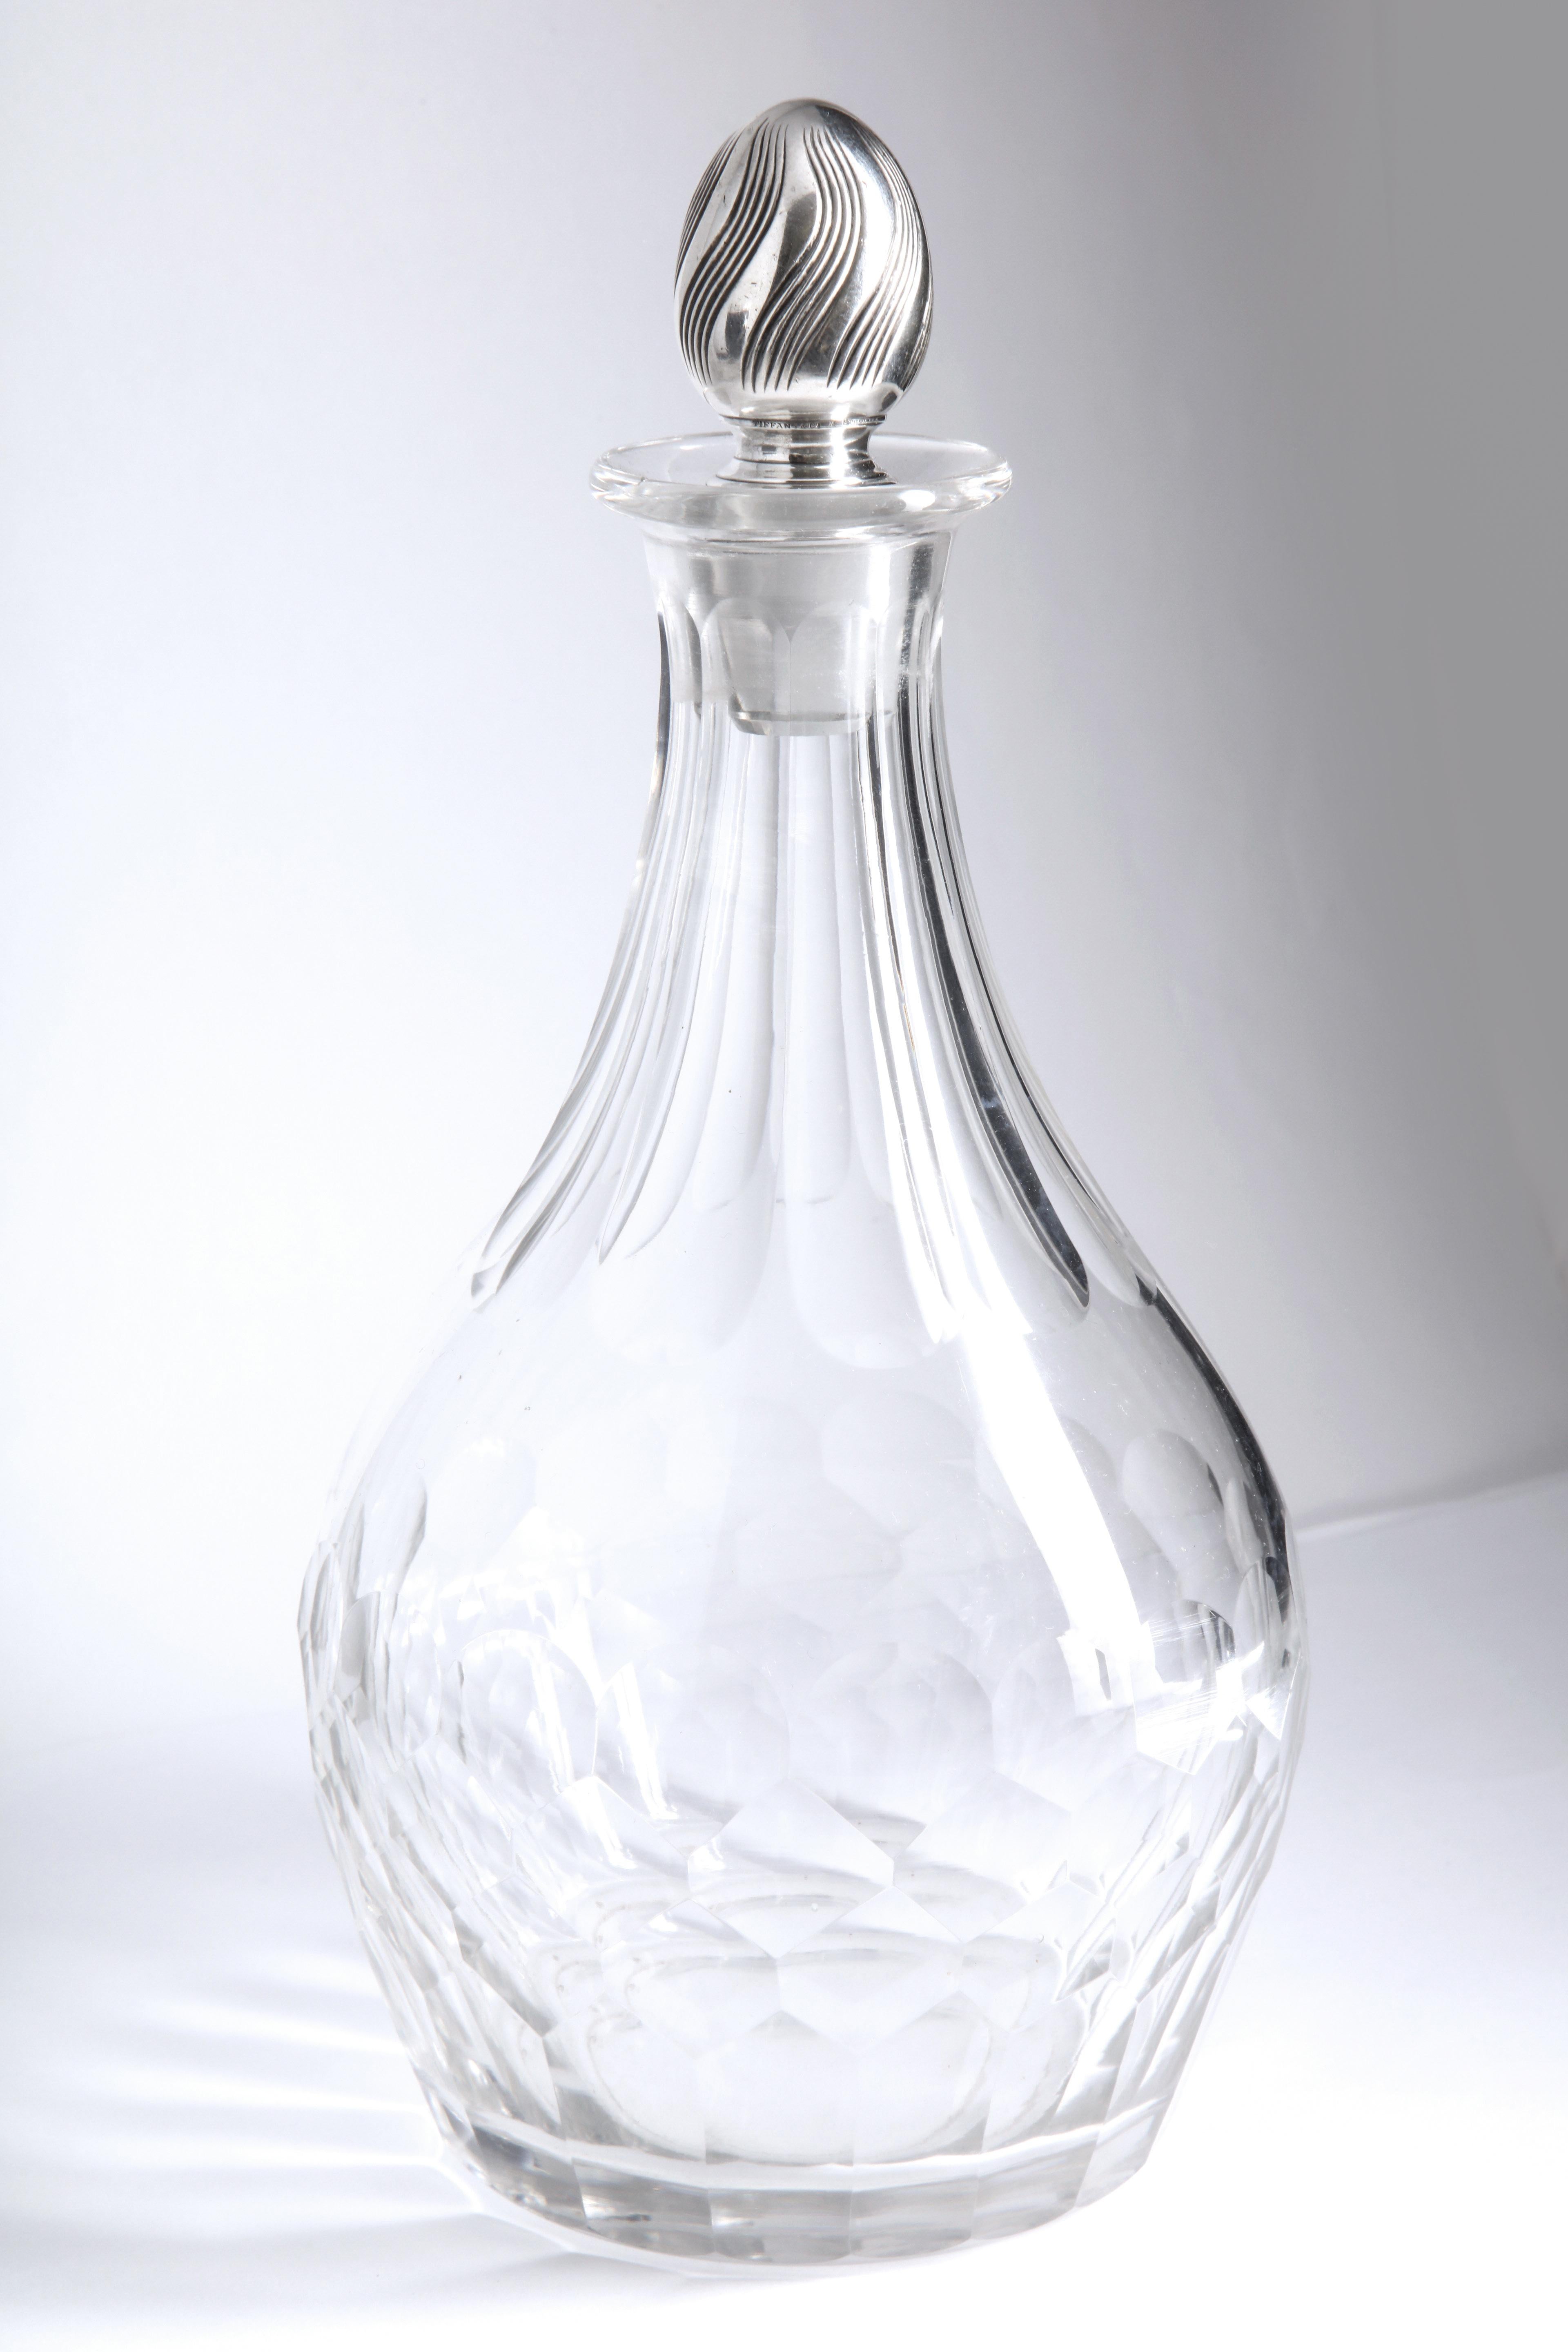 Art Nouveau, sterling silver-mounted, thumb-print design decanter by Tiffany and Co., New York, mark used between 1875-91. Stands 9 3/4 inches high (with stopper) x 4 3/4 inches diameter at widest point. One very, very minor unnoticeable nick on